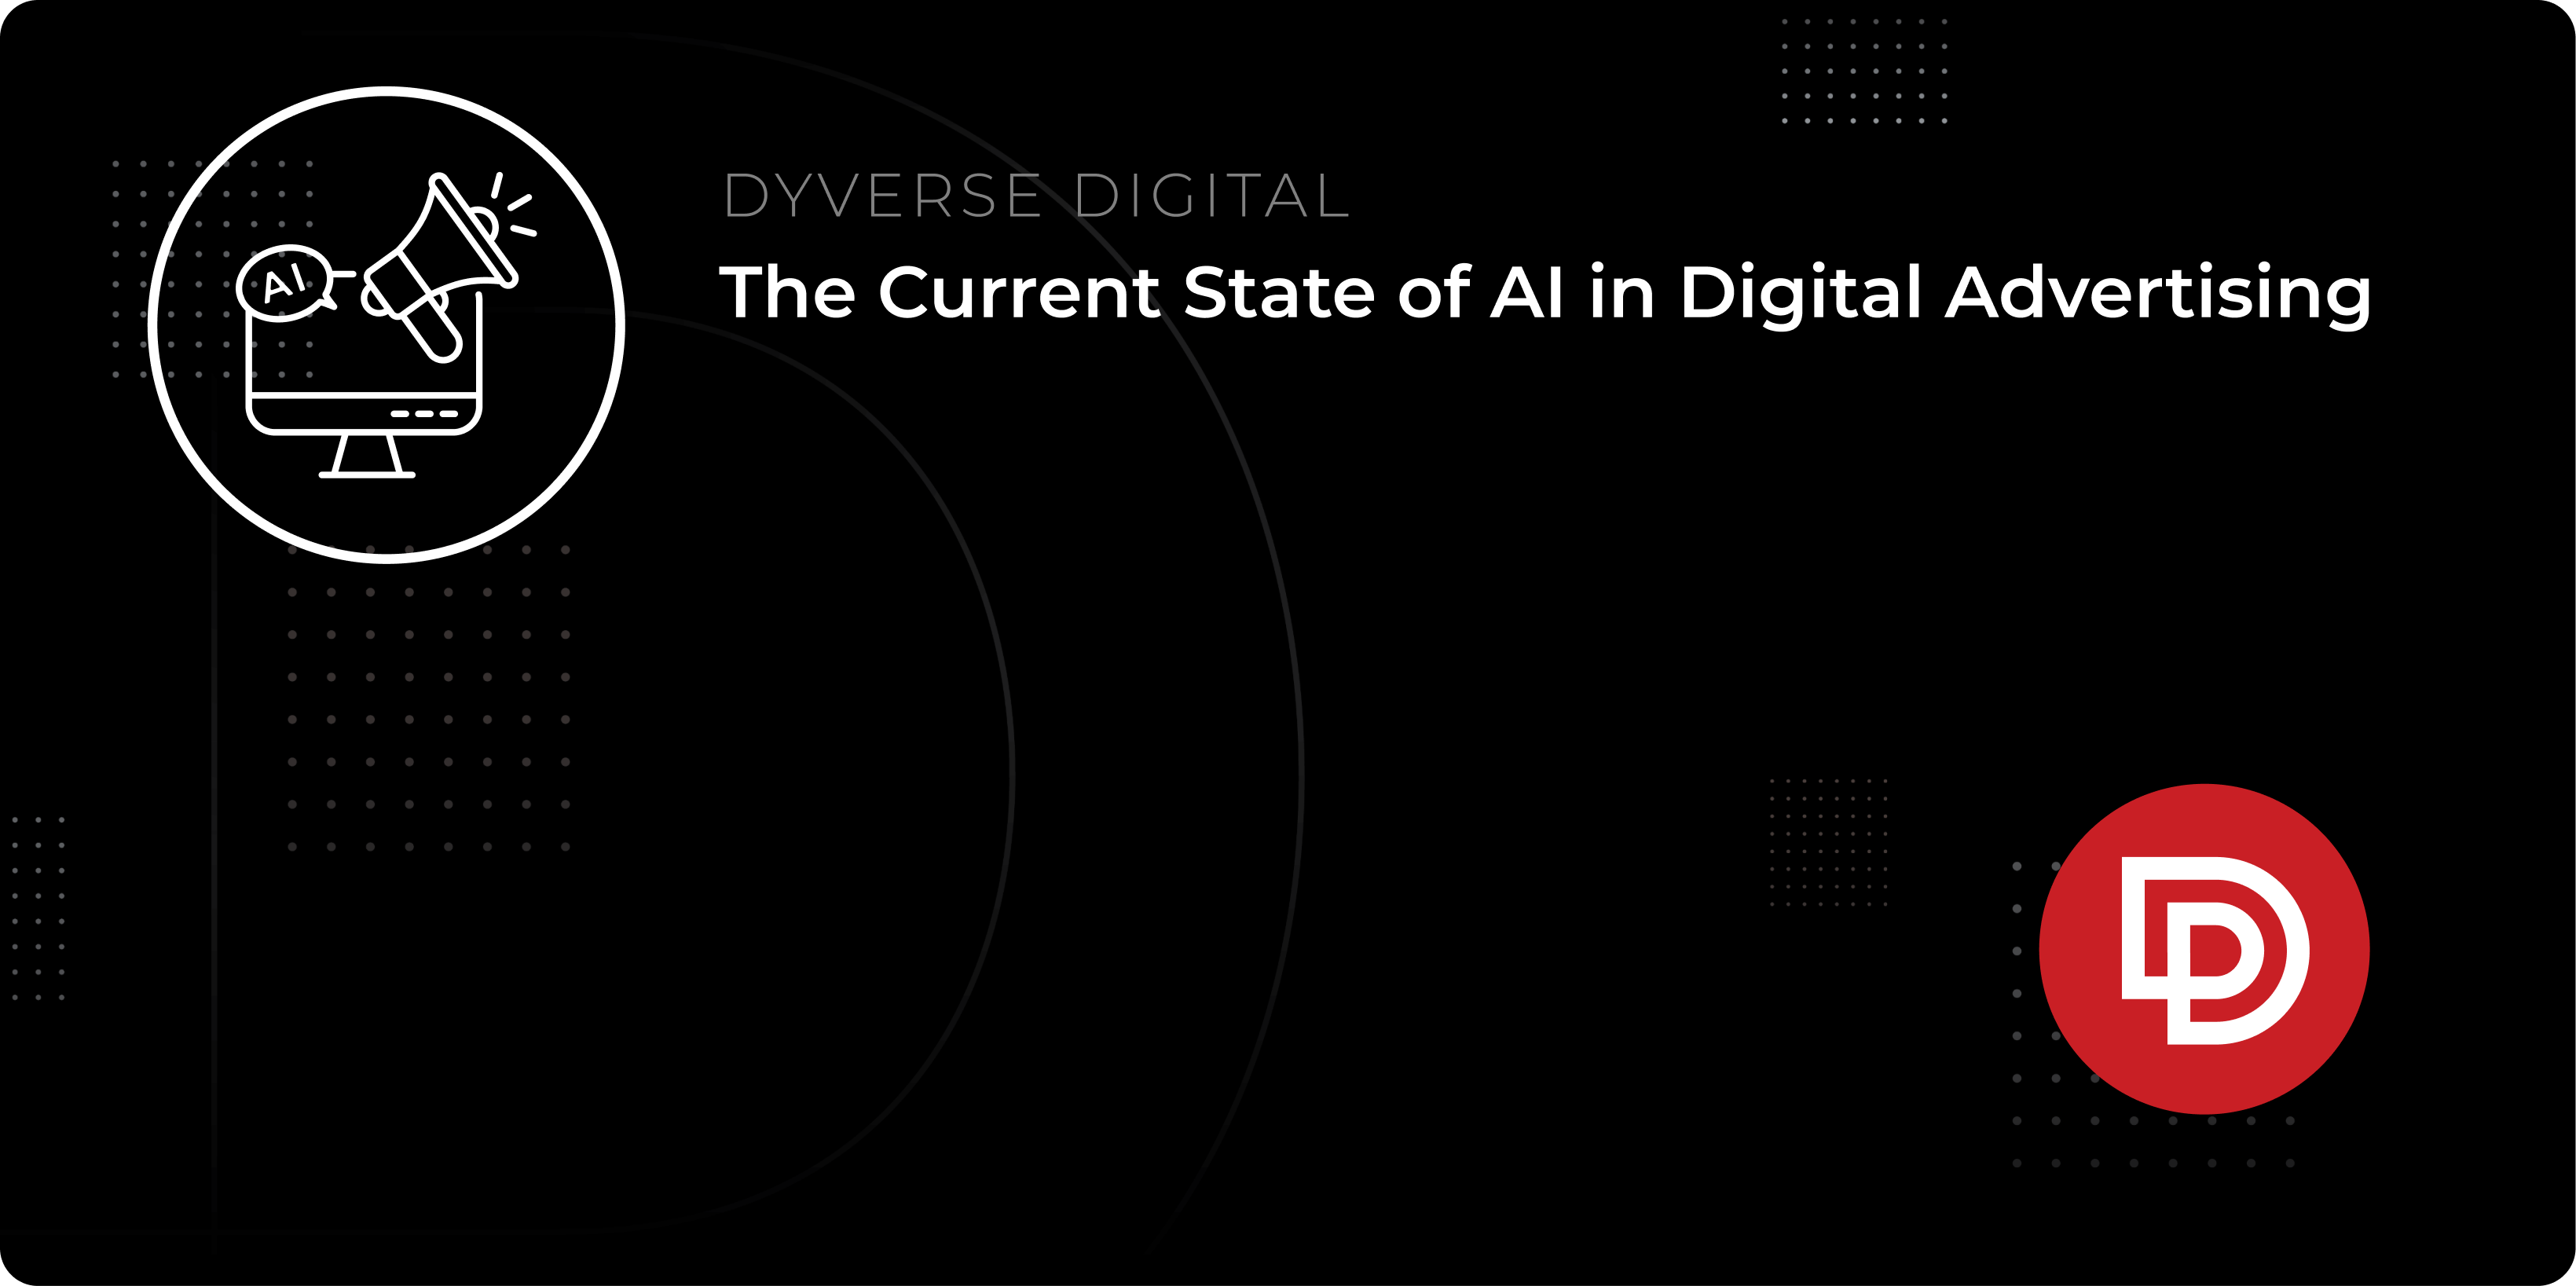 The Current State of AI in Digital Advertising